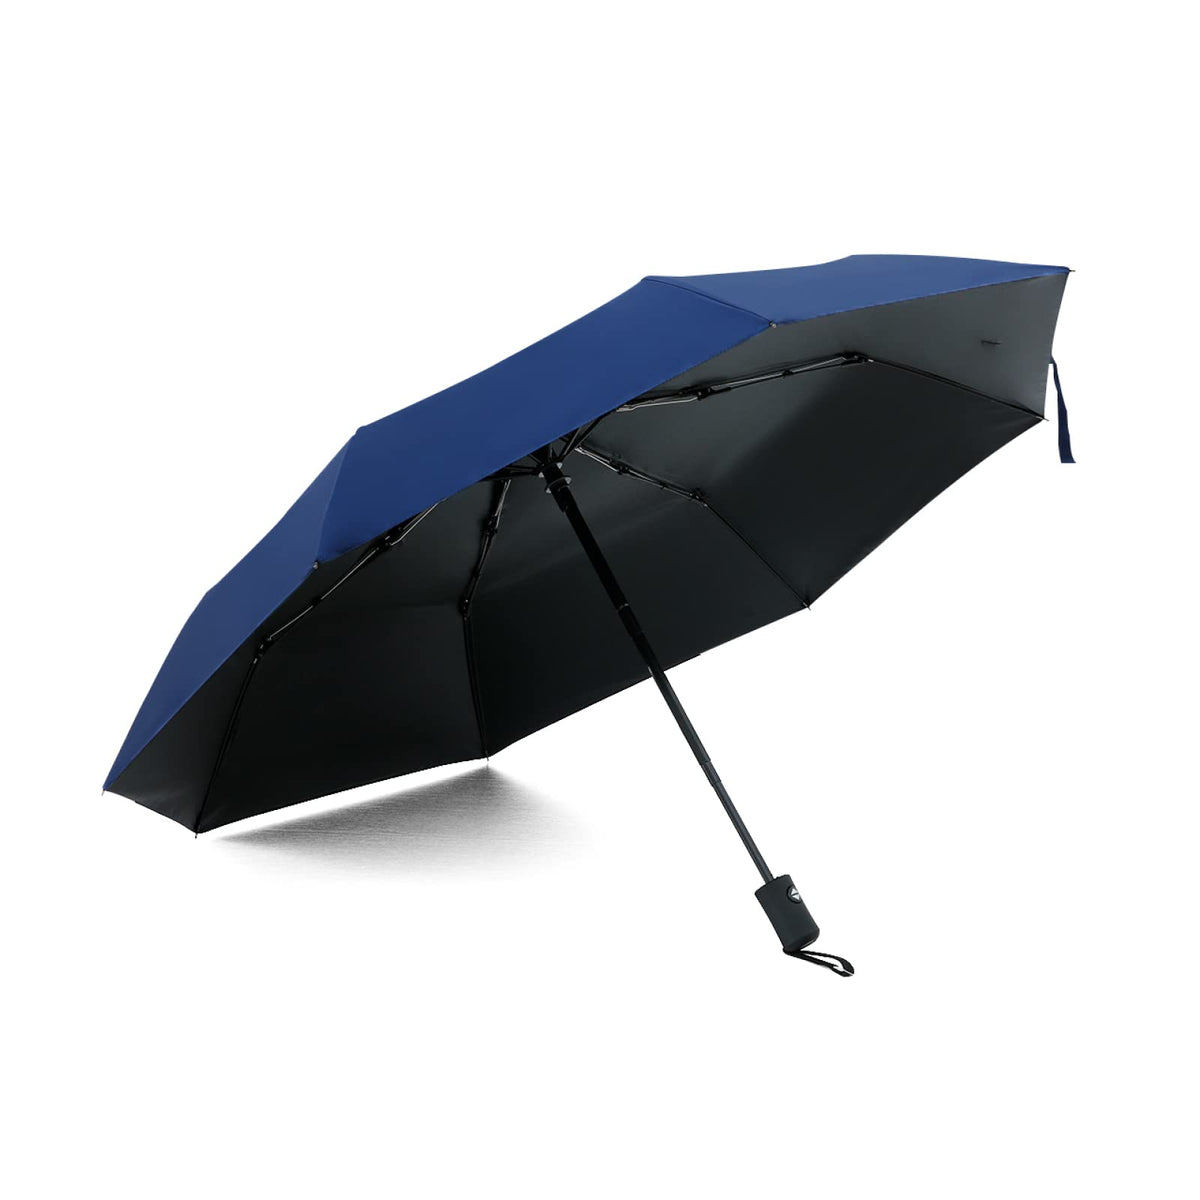 ABSORBIA 8K 3fold auto open umbrella for Rain,Sun Protection and also windproof|Double Layer Folding Portable Umbrella with cover|Blue|with black coating for UV potection|Fancy & Easy to Travel